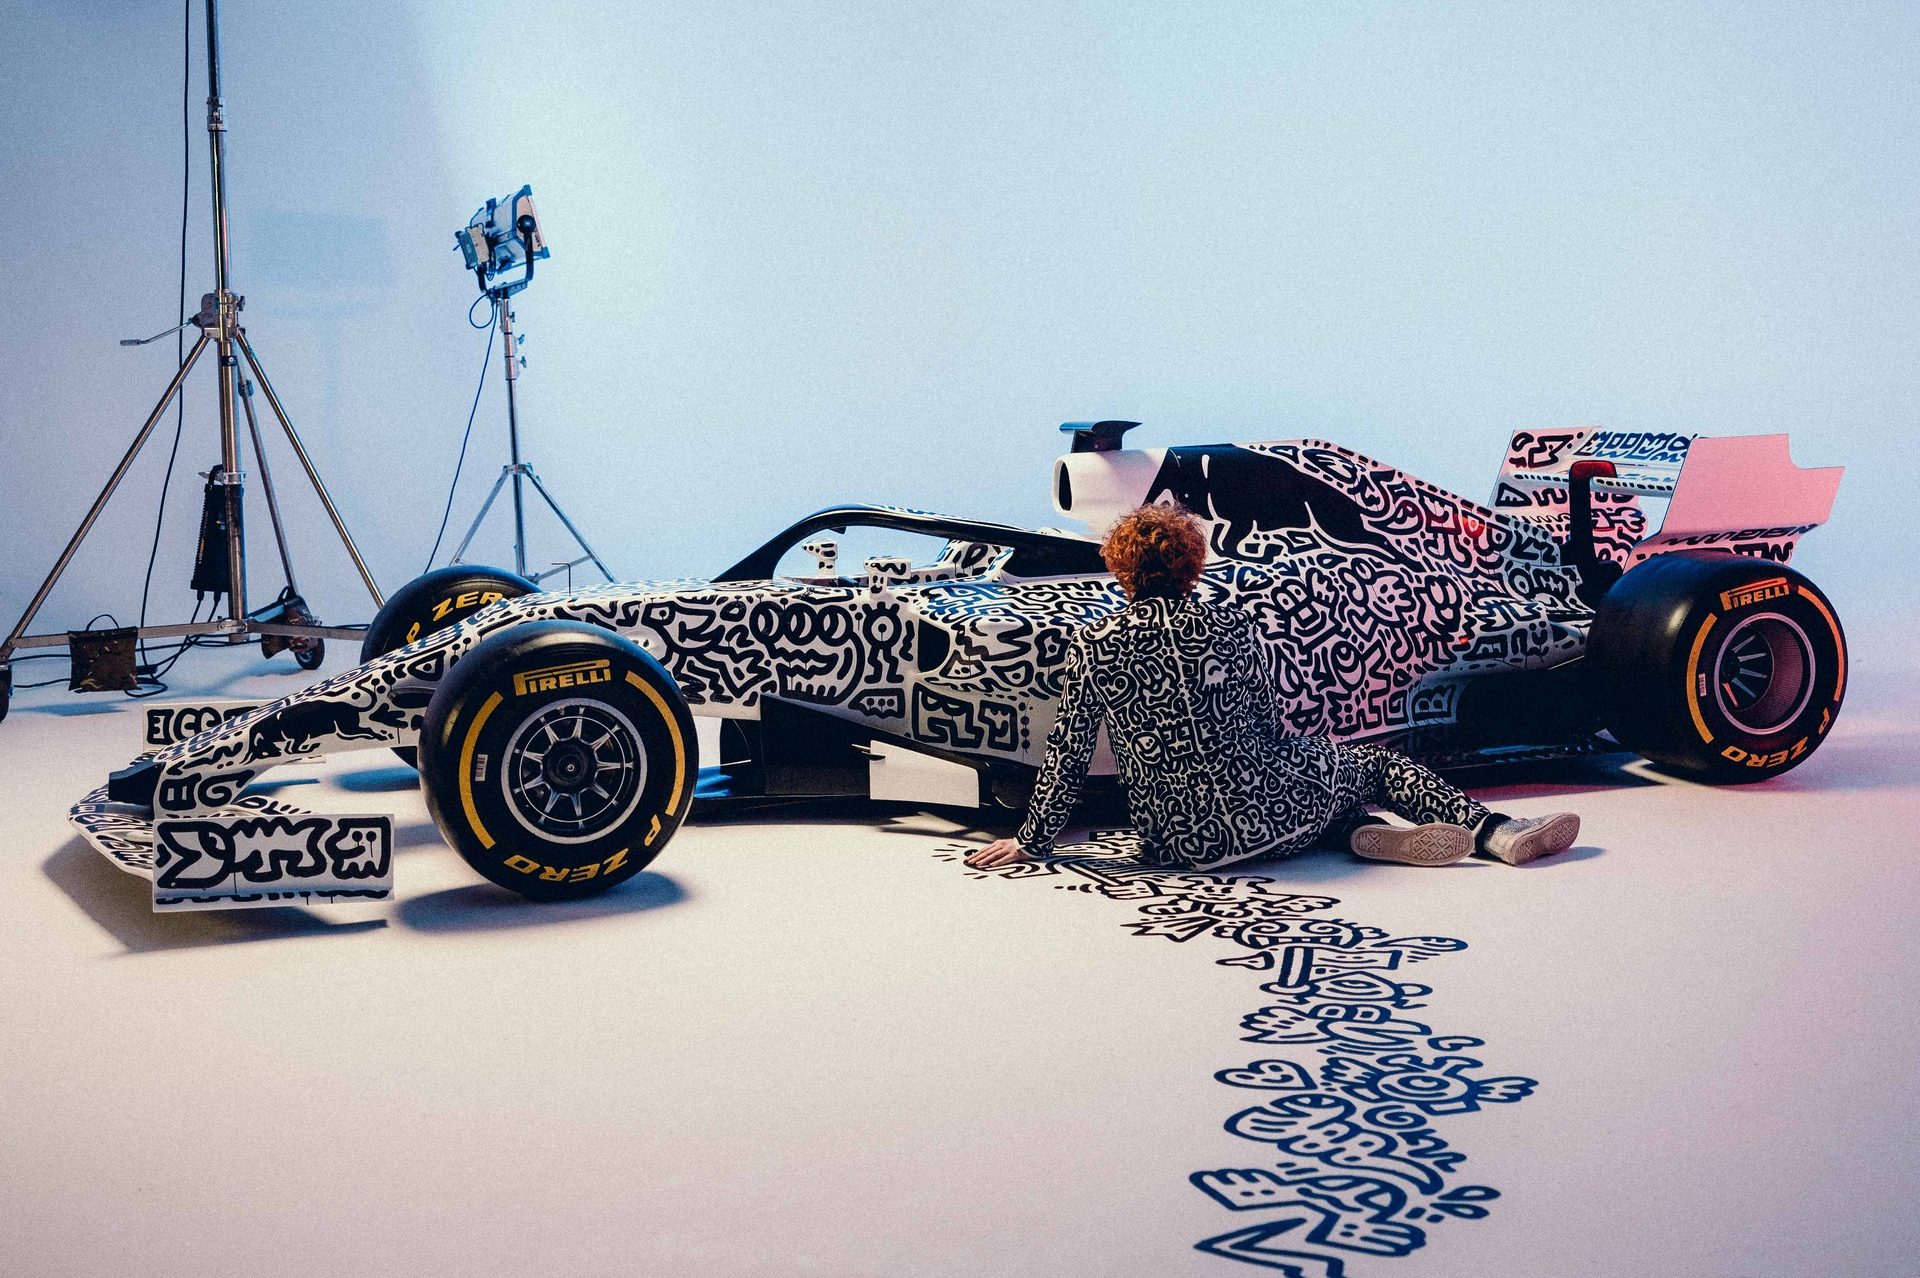 Mr. Doodle seen during a photo shoot of the collaboration of Red Bull Racing and Mr. Doodle with the RB14 in London, United Kingdom in 2023. // Red Bull Racing / Red Bull Content Pool // SI202301310383 // Usage for editorial use only //